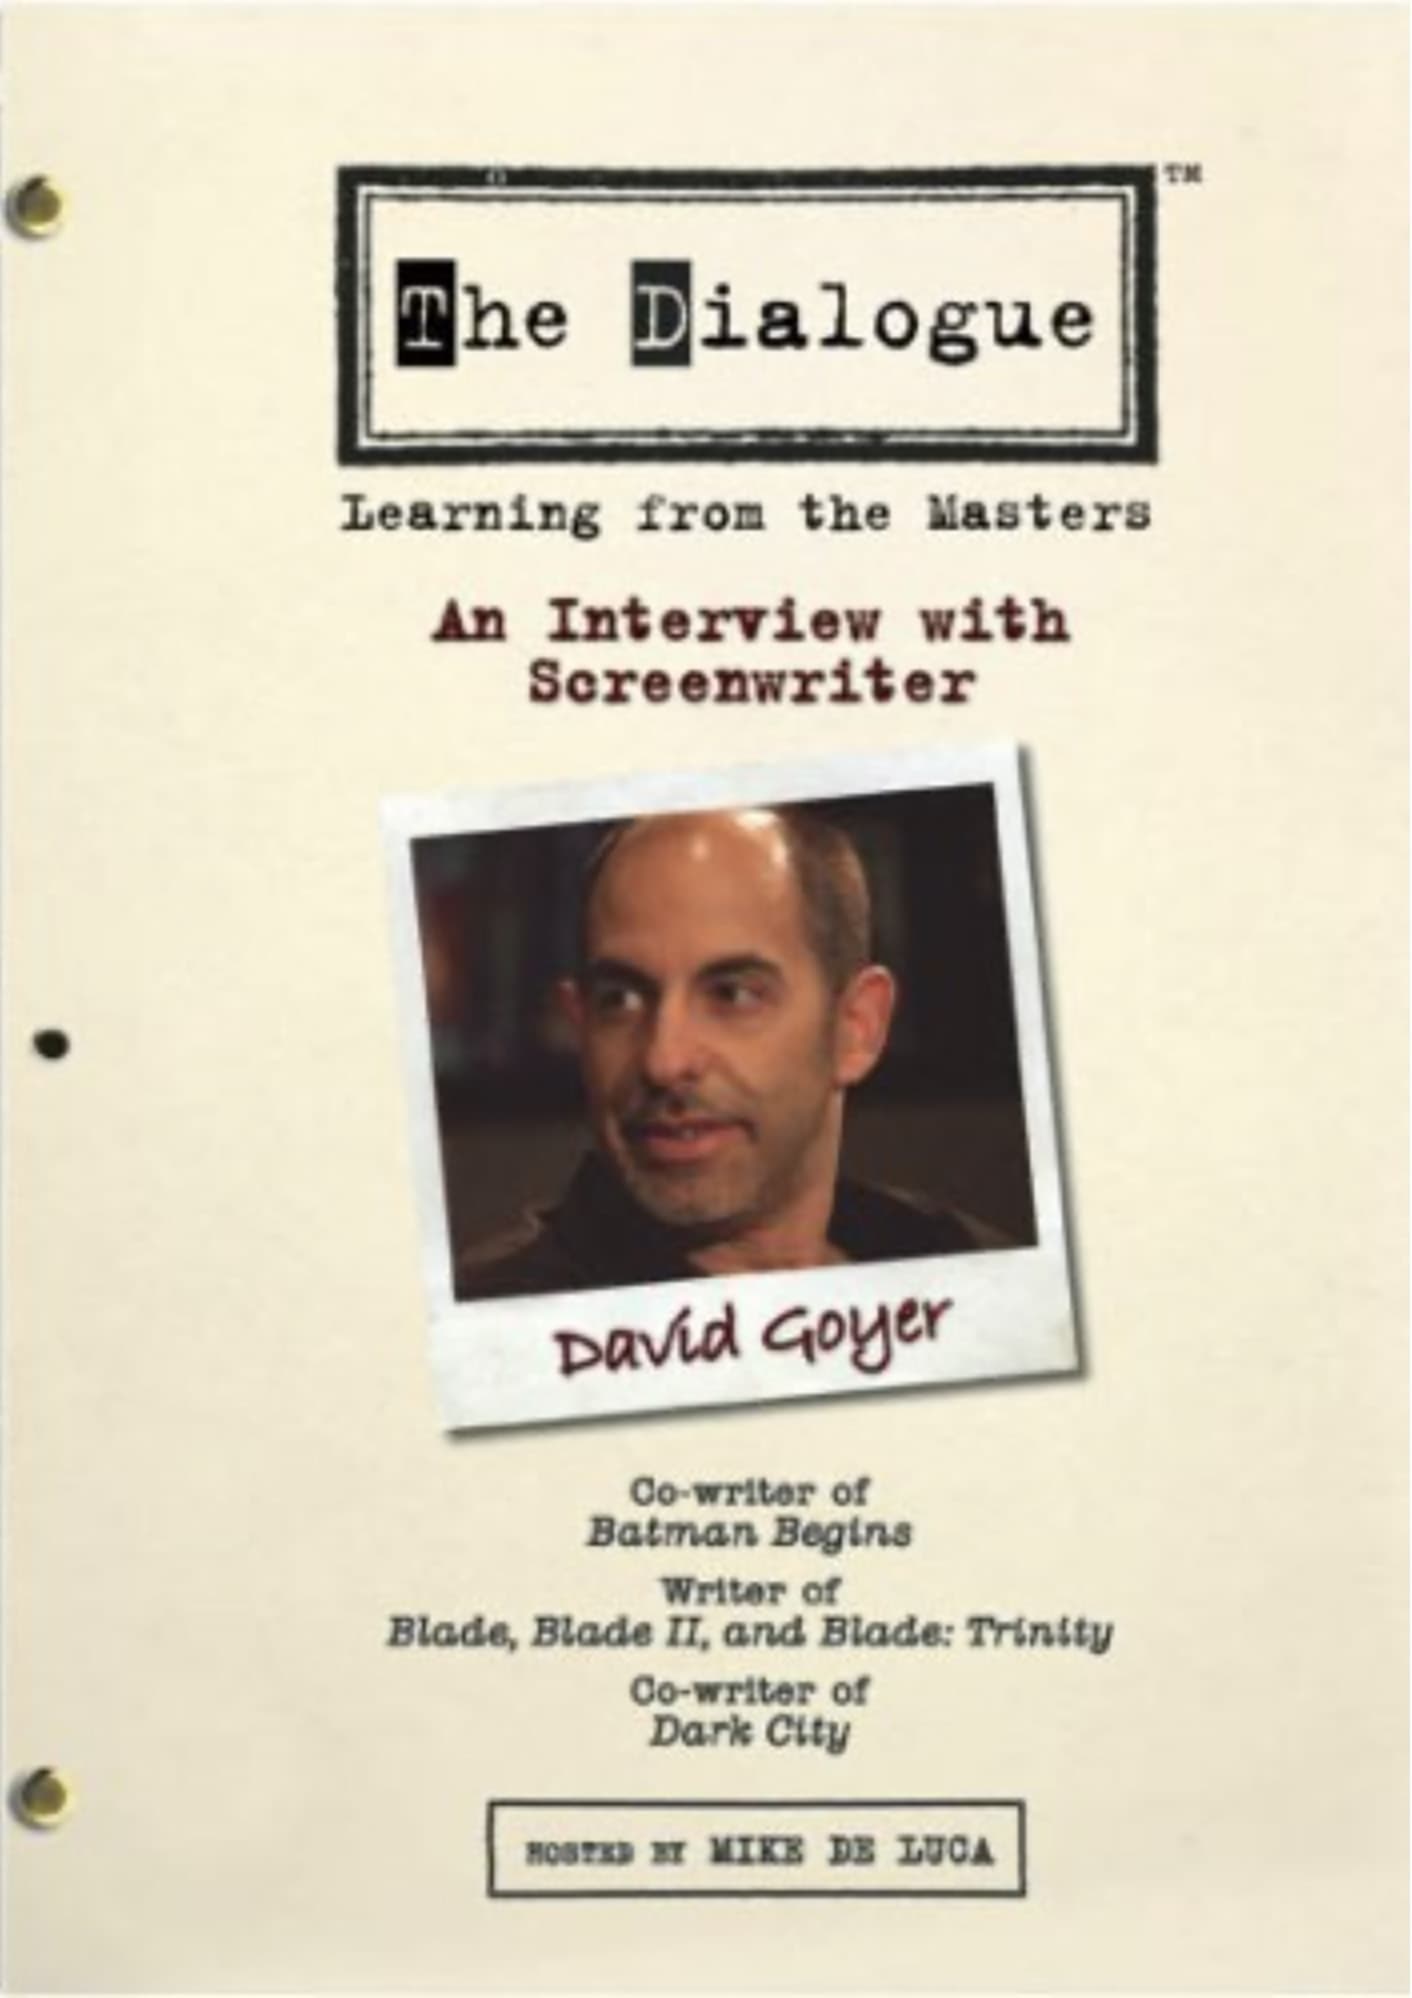 The Dialogue: An Interview with Screenwriter David Goyer (2006)